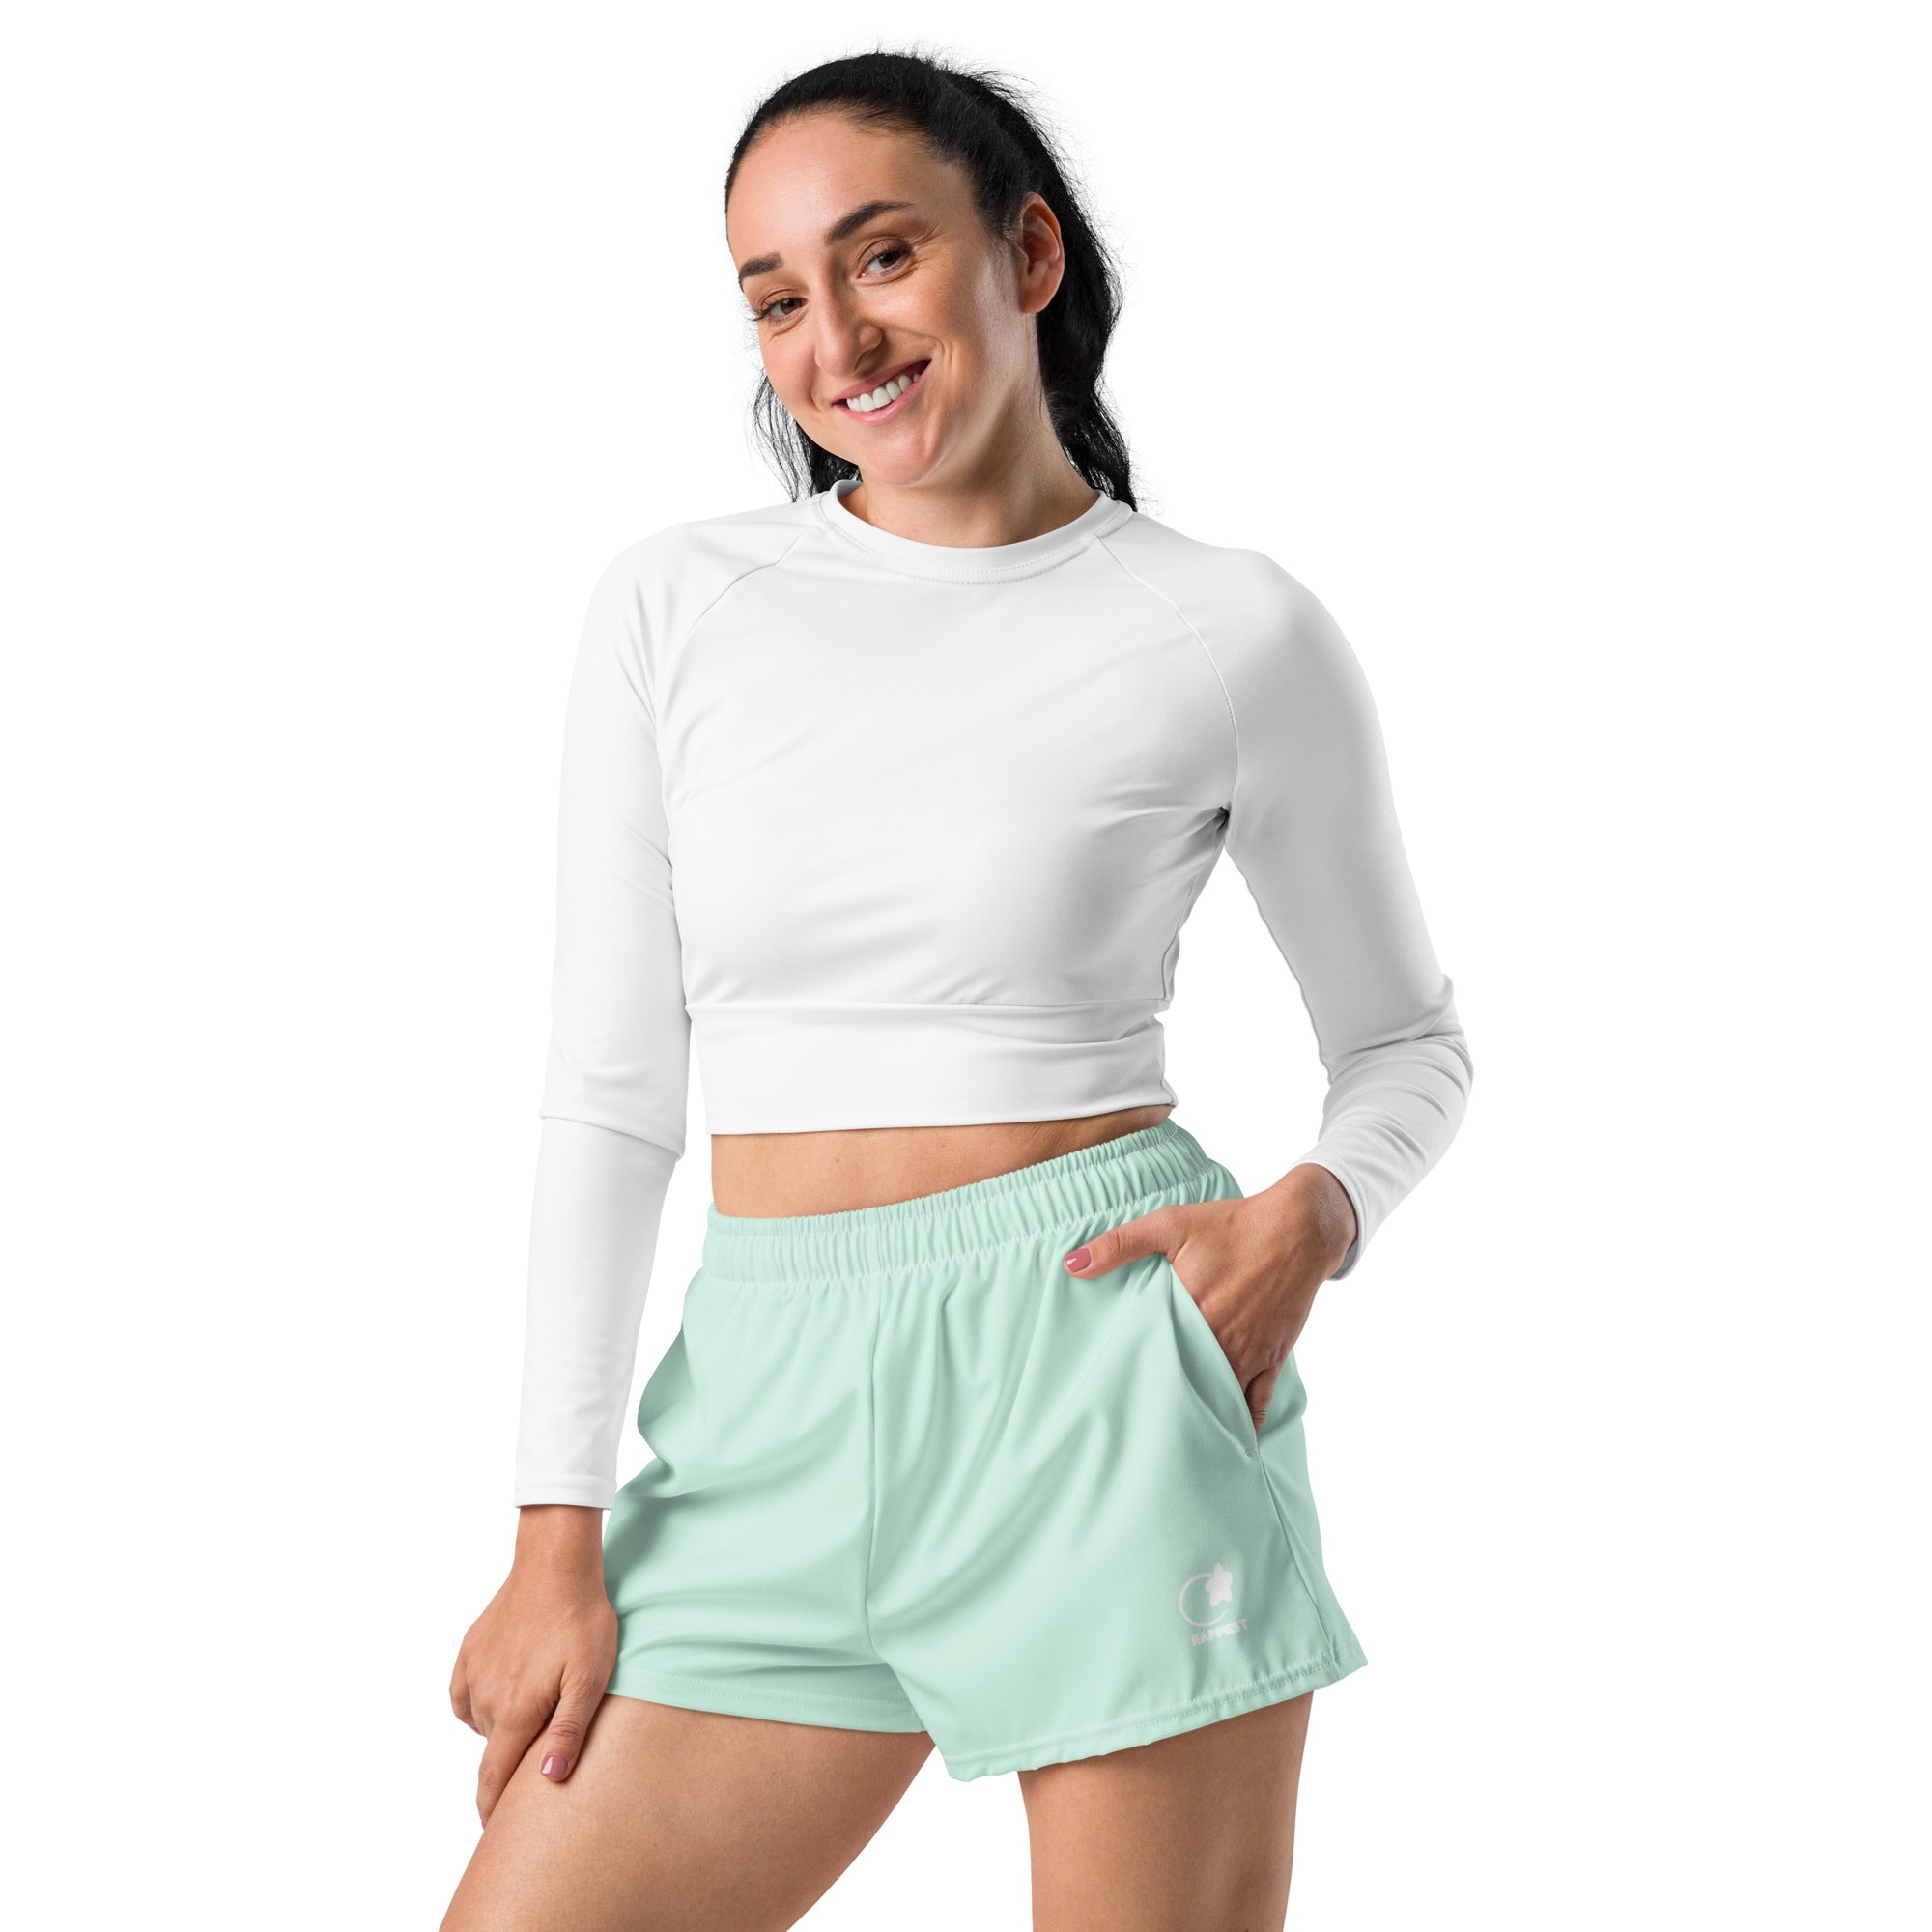 Mint Women’s Recycled Athletic Shorts